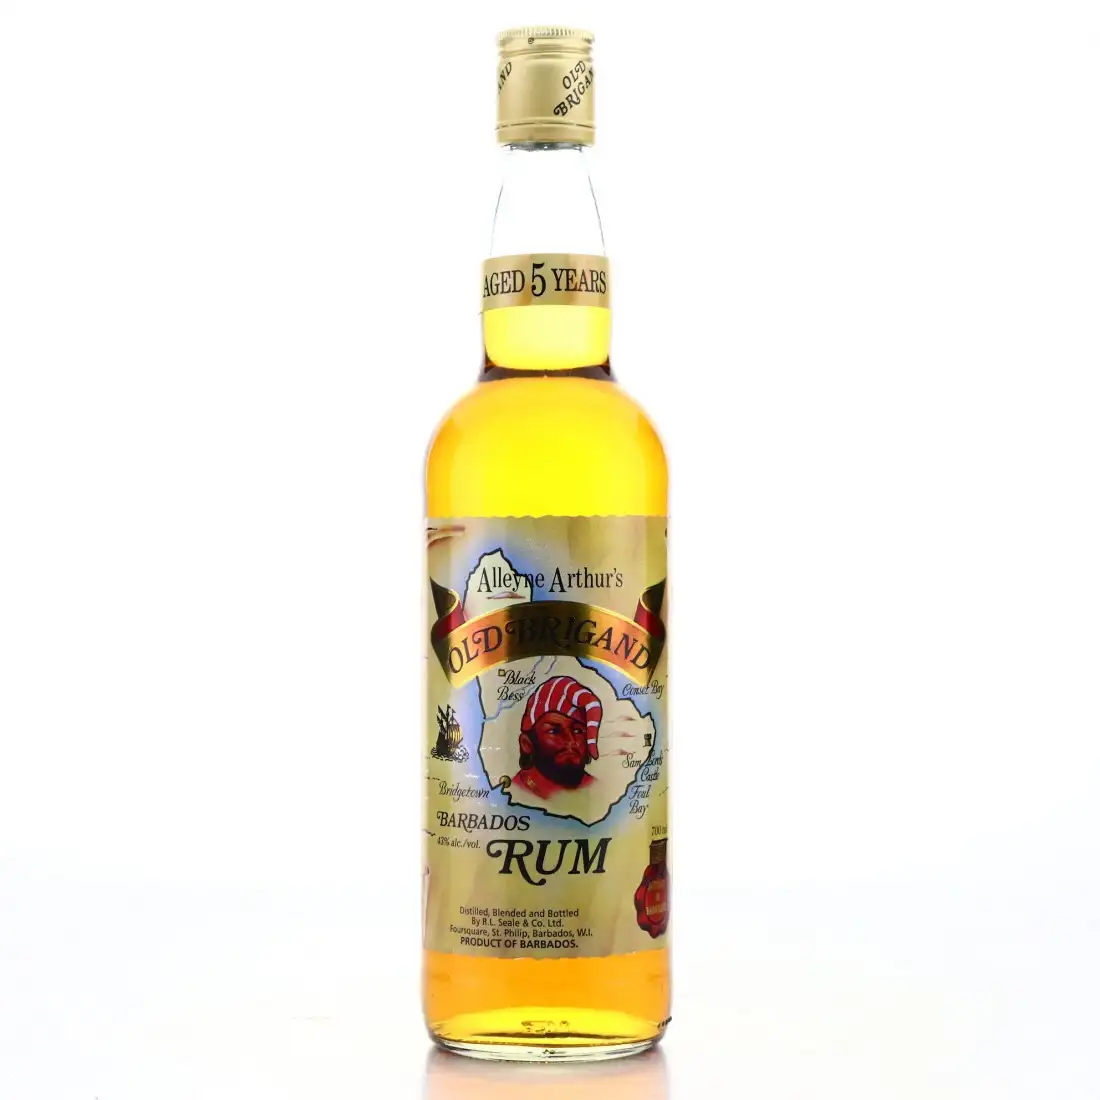 Image of the front of the bottle of the rum Old Brigand